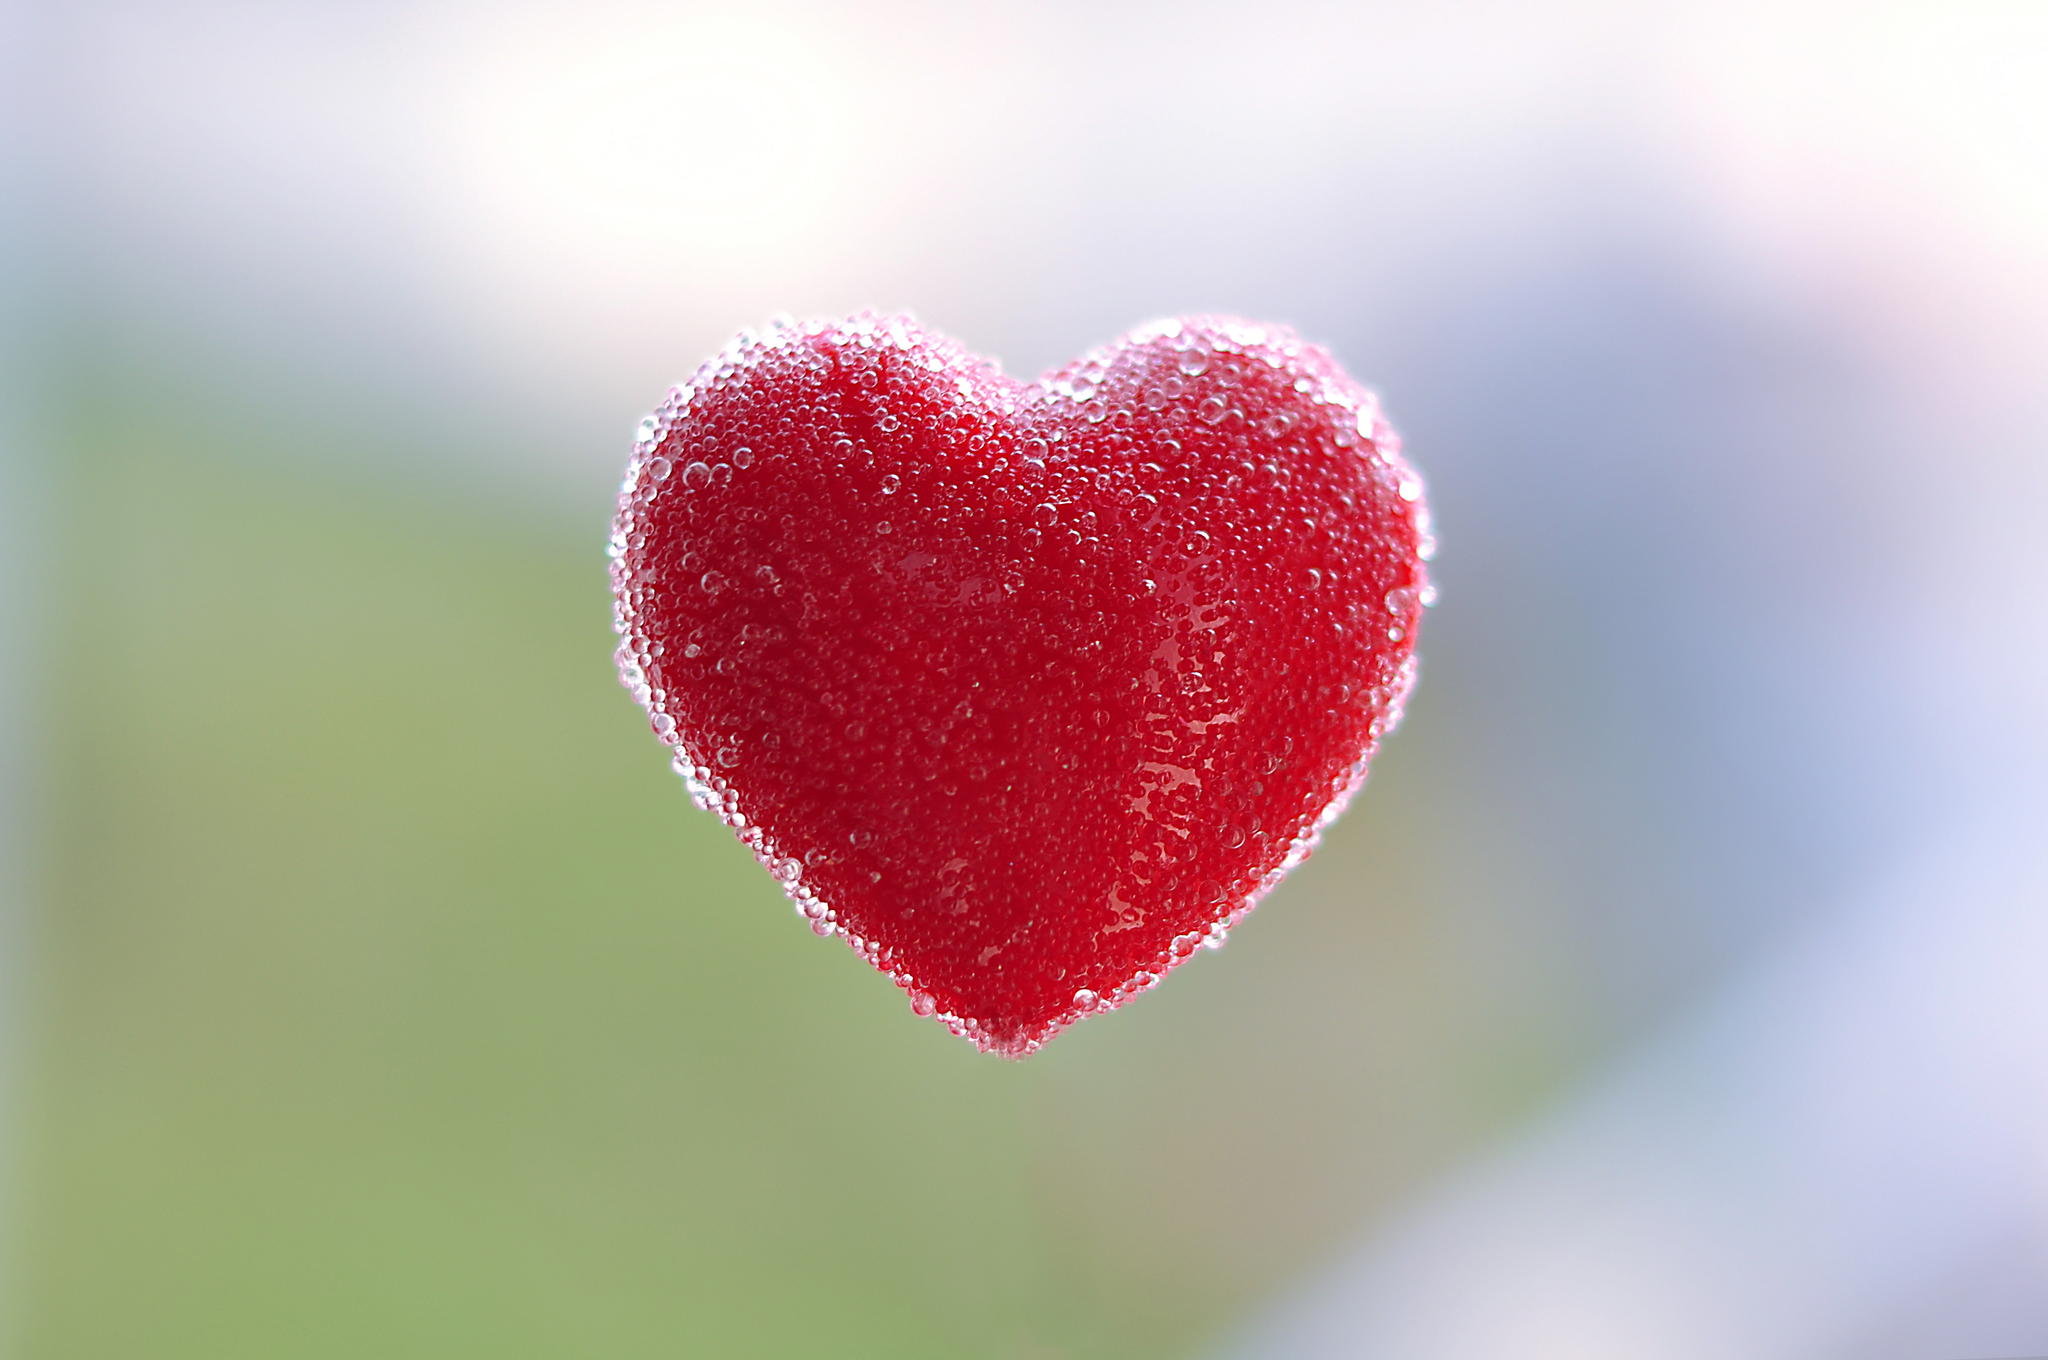 dil wallpaper free download,heart,red,love,close up,plant